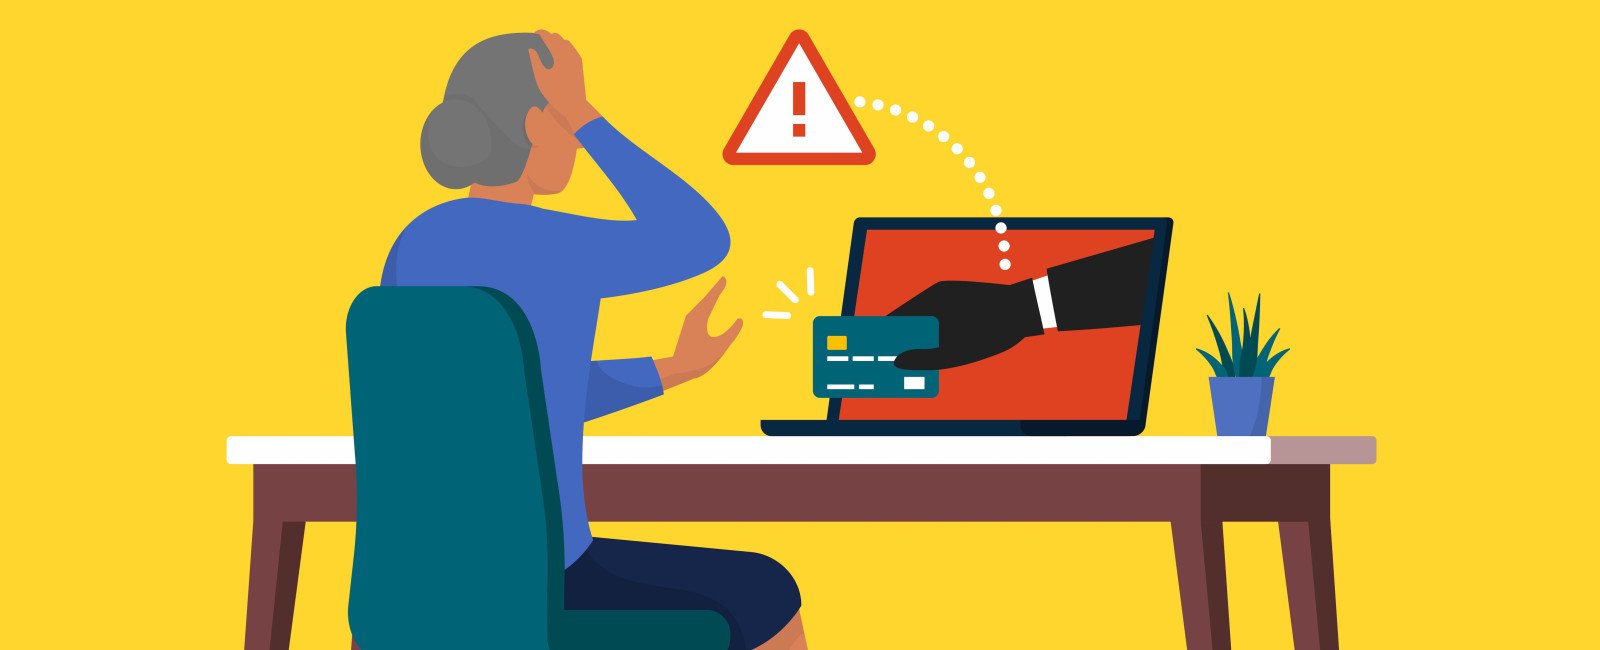 Computer Fraud illustration of woman at her PC in distress